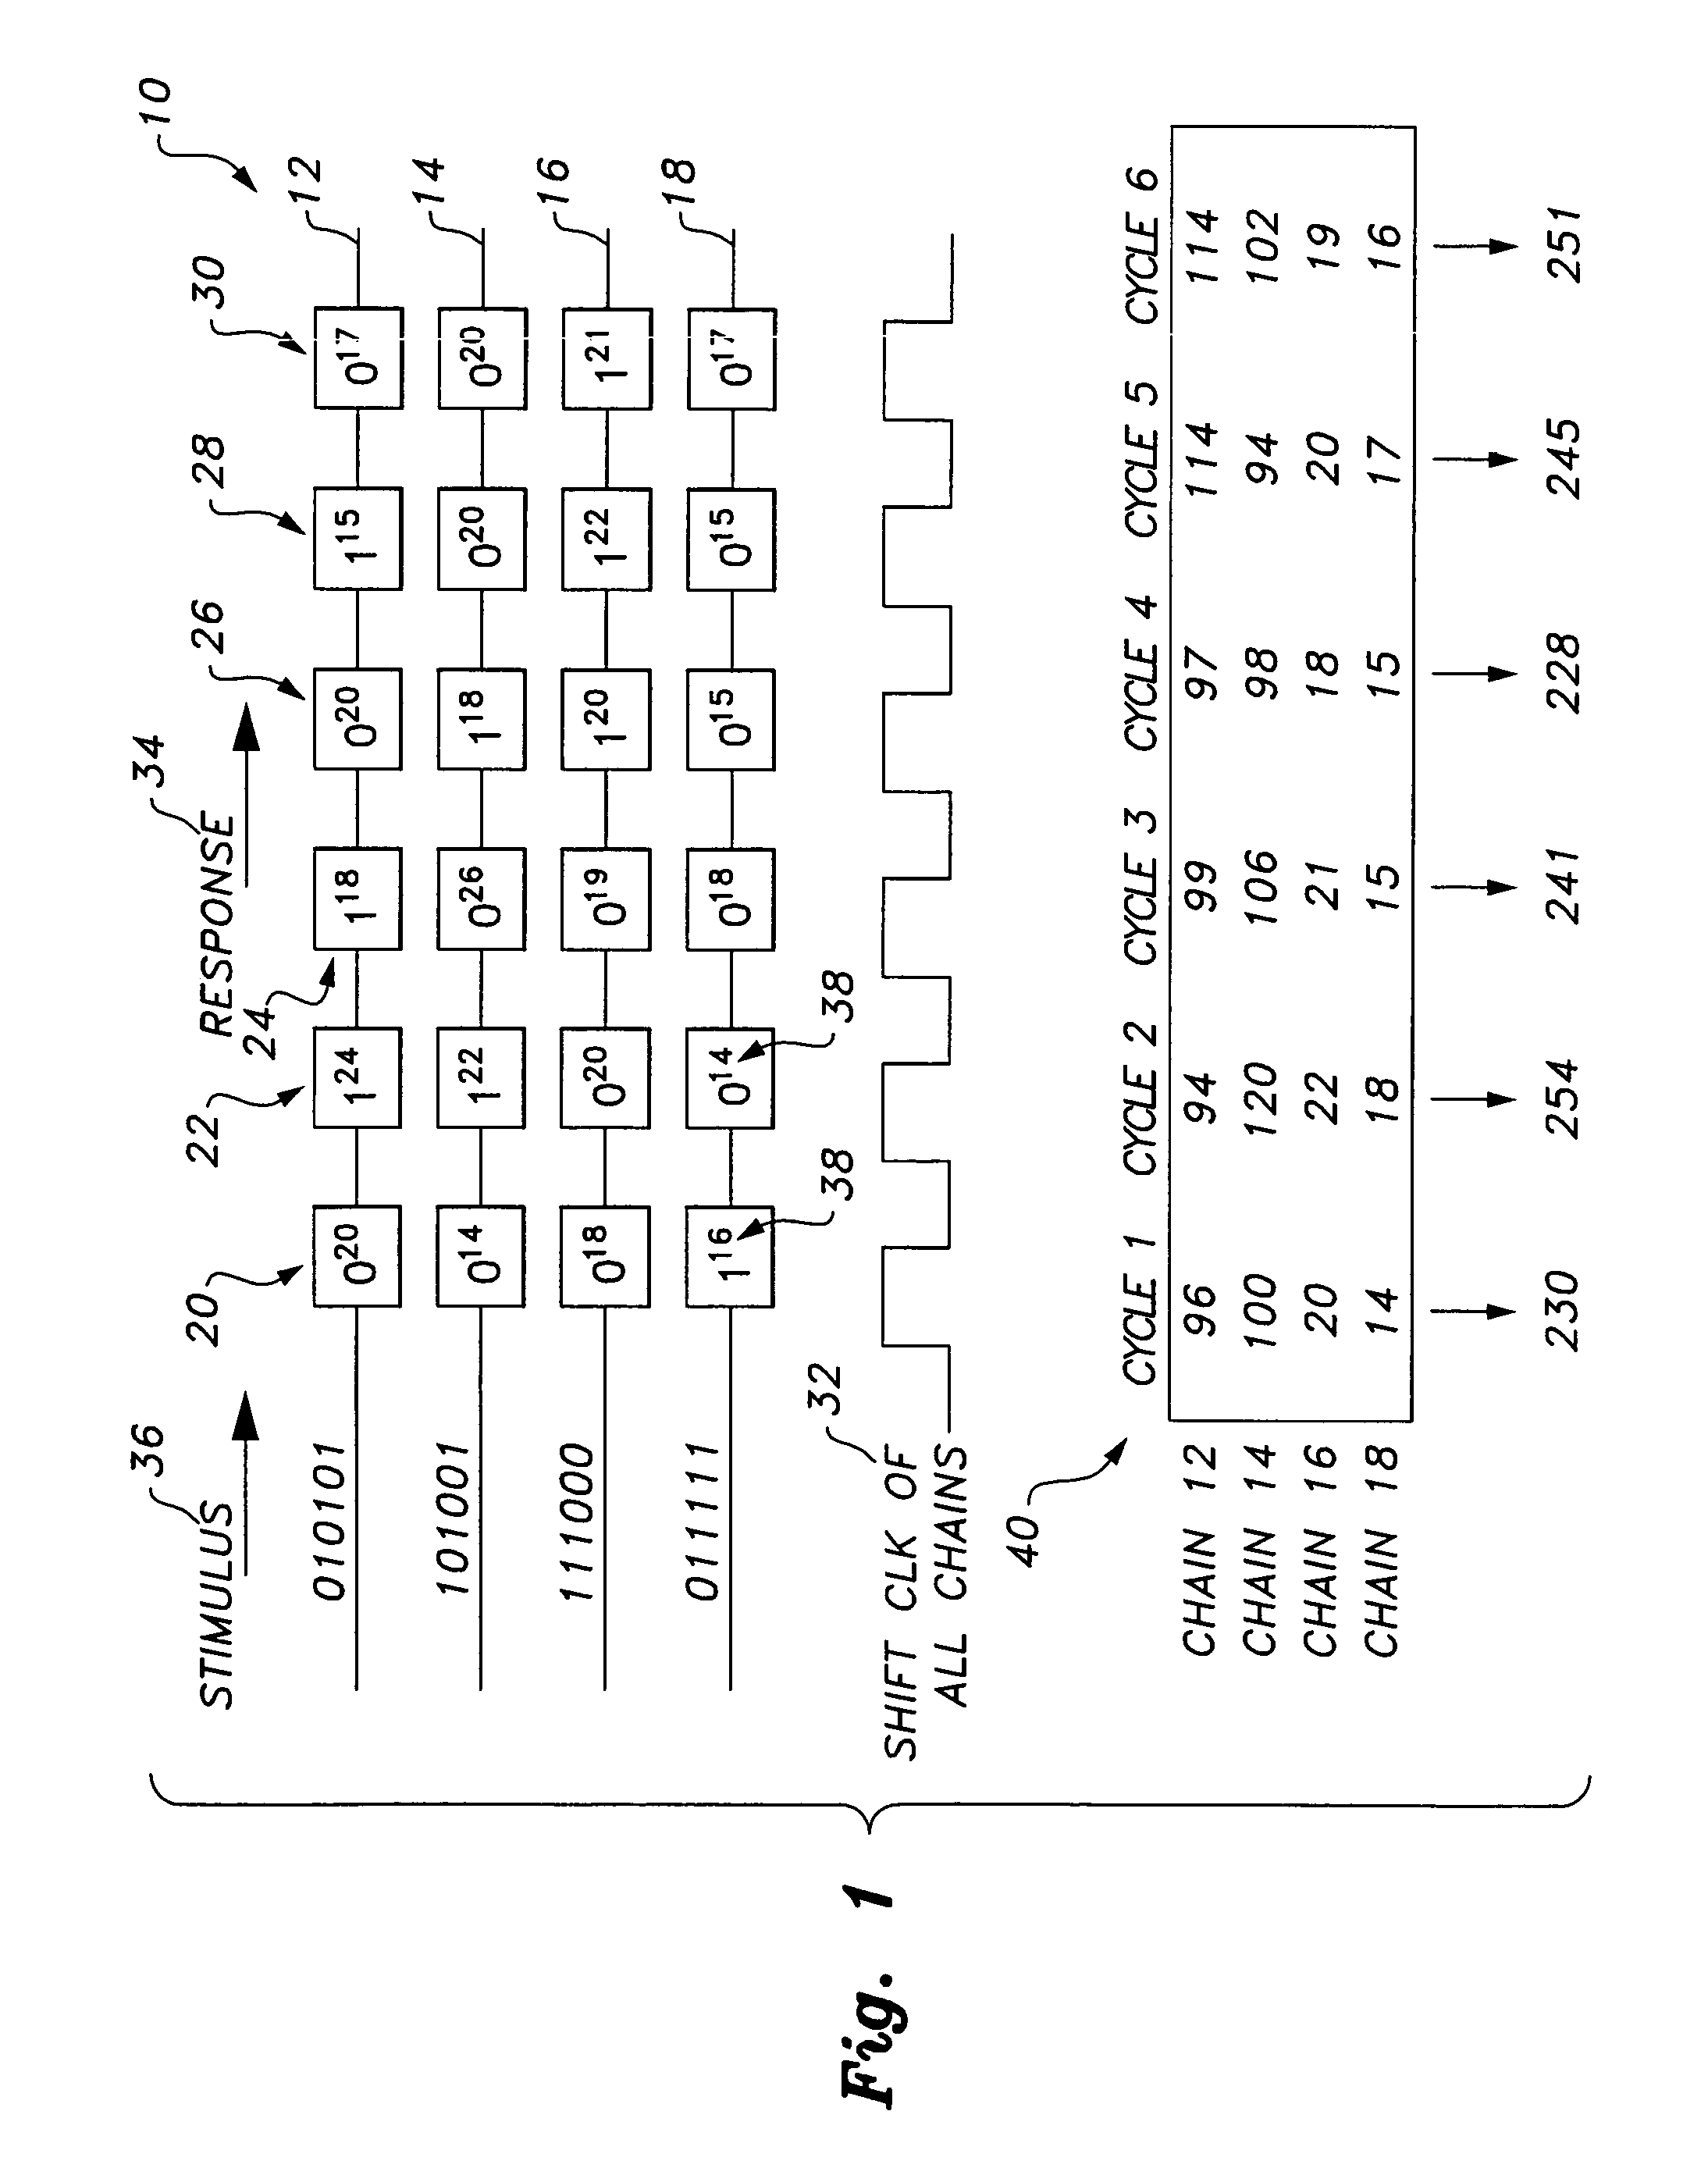 Circuit and method providing dynamic scan chain partitioning